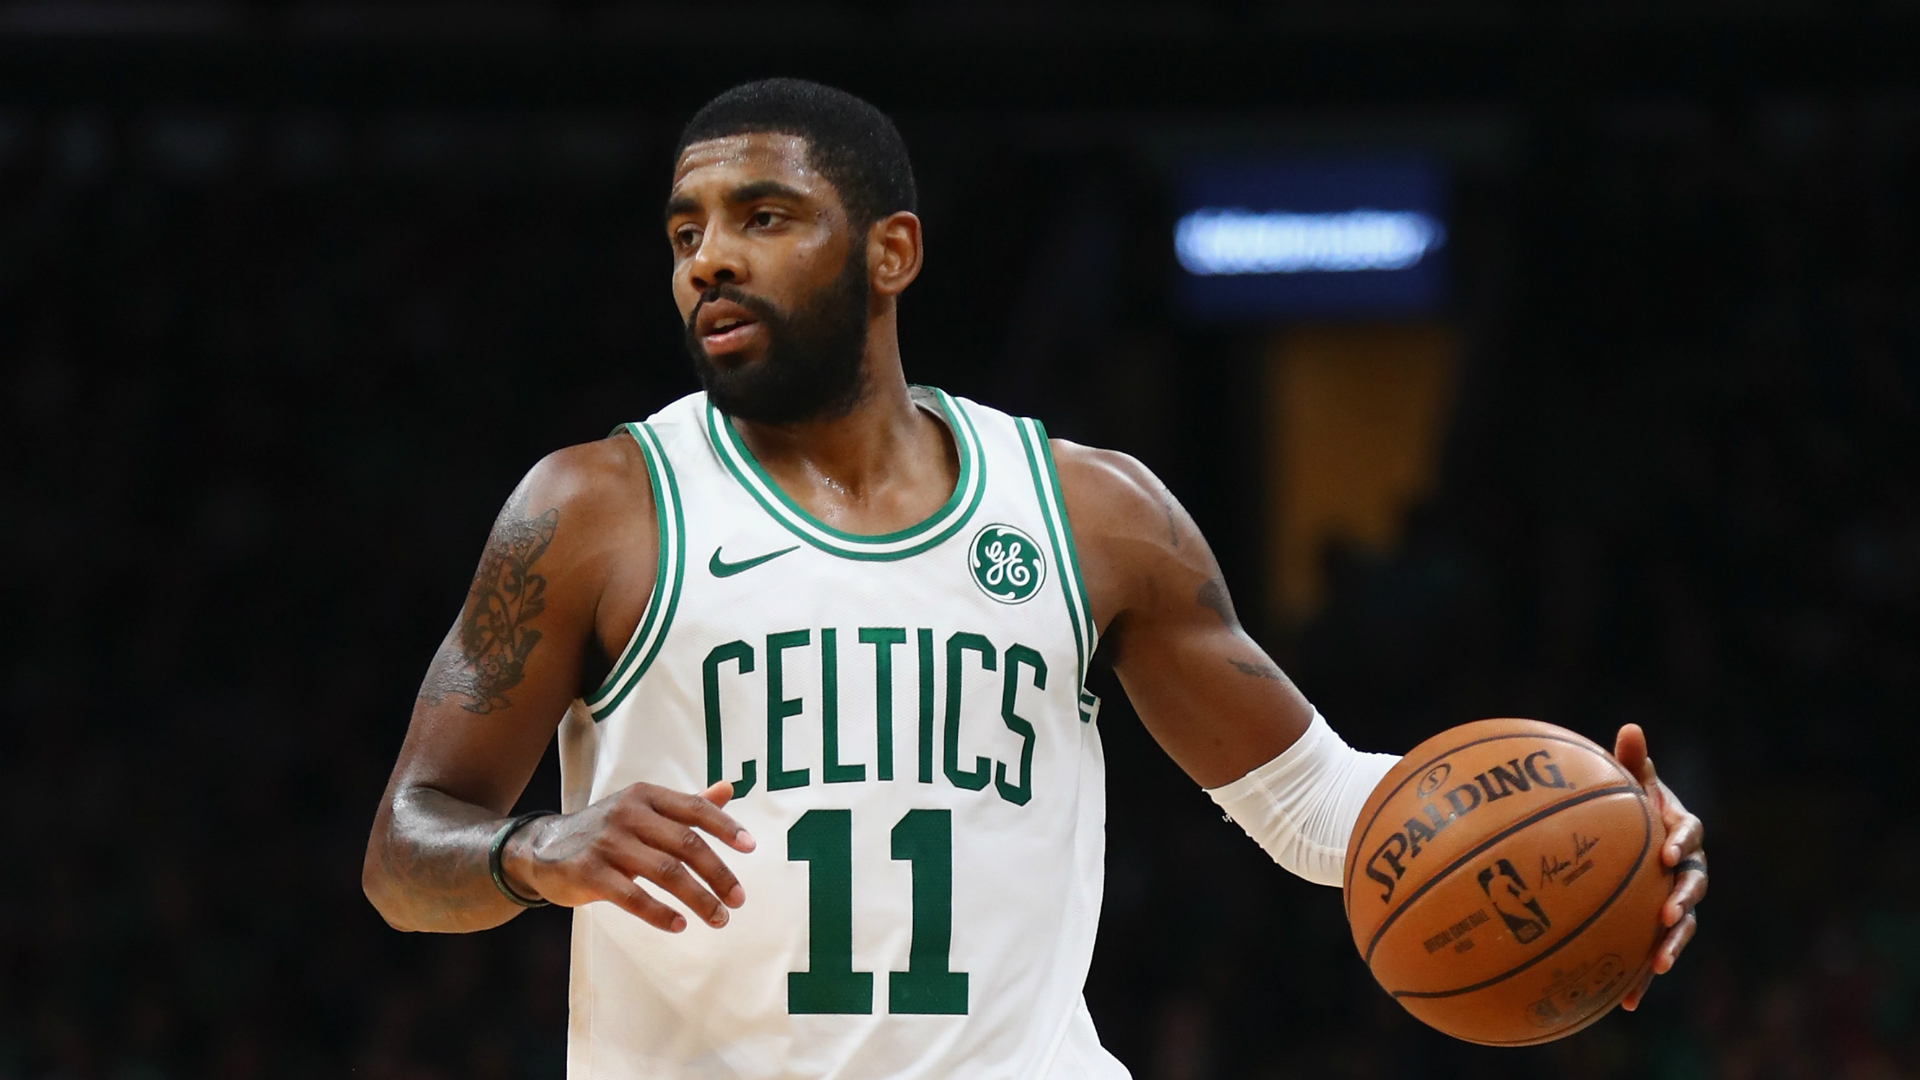 Kyrie Irving scored 43 points at 18 of 26 from the field and provided 11 assists as Boston toppled the Eastern Conference-leading Raptors.